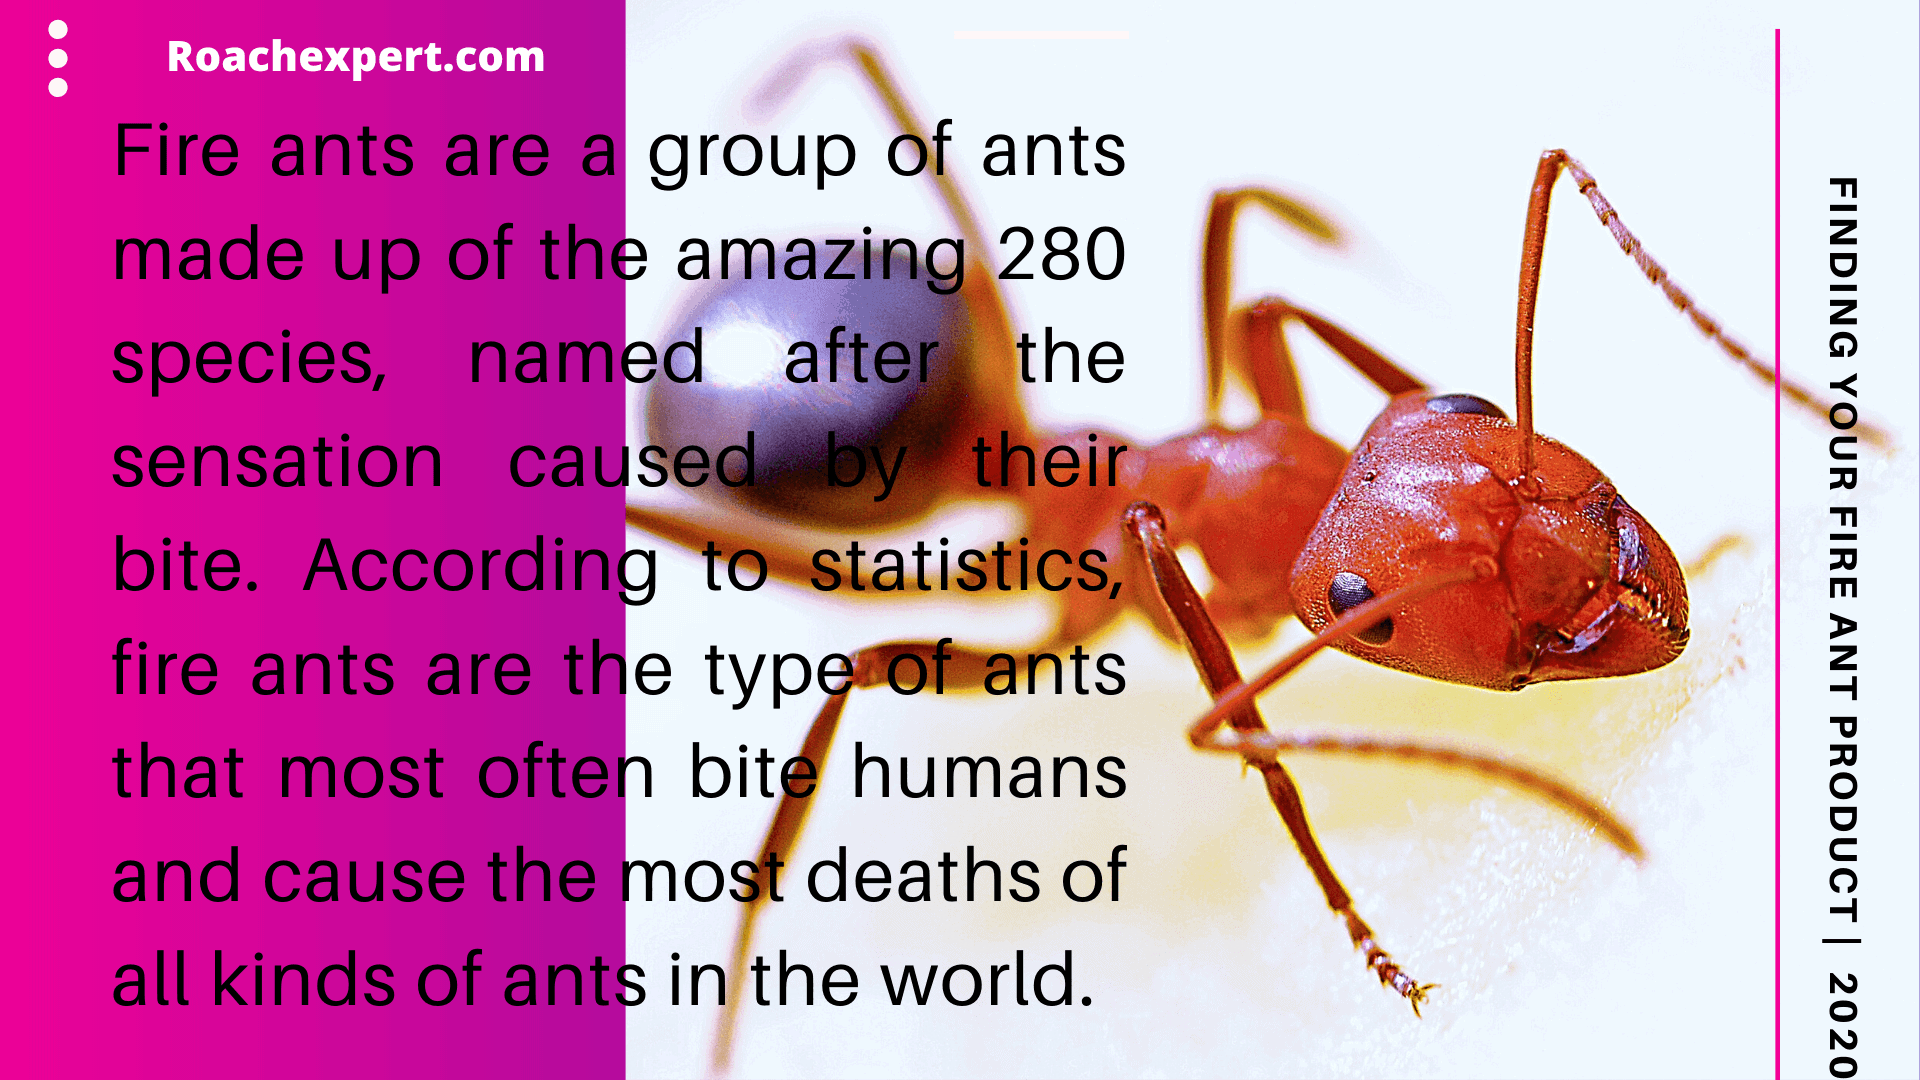 How to get rid of fire ants permanently